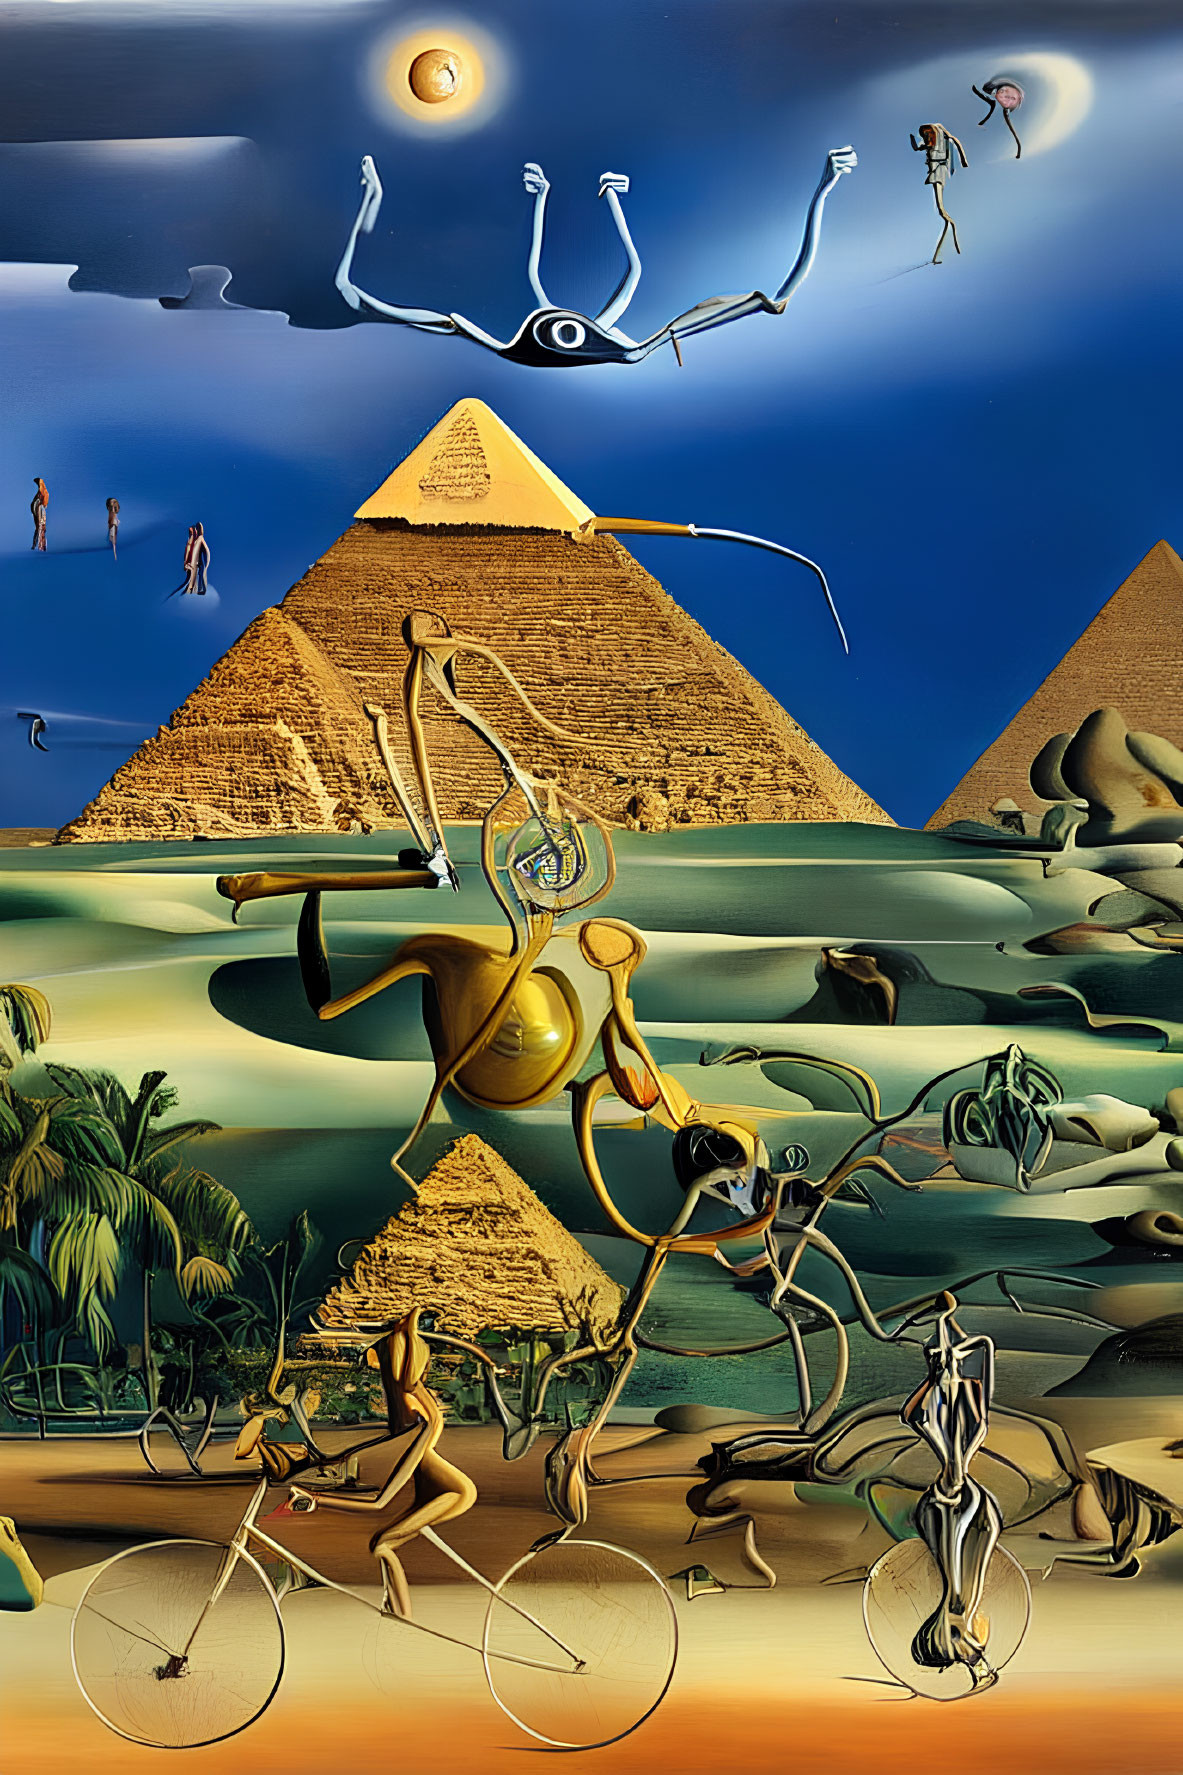 Surrealistic Painting: Great Pyramid, Floating Figures, Bicycles, Desert Landscape